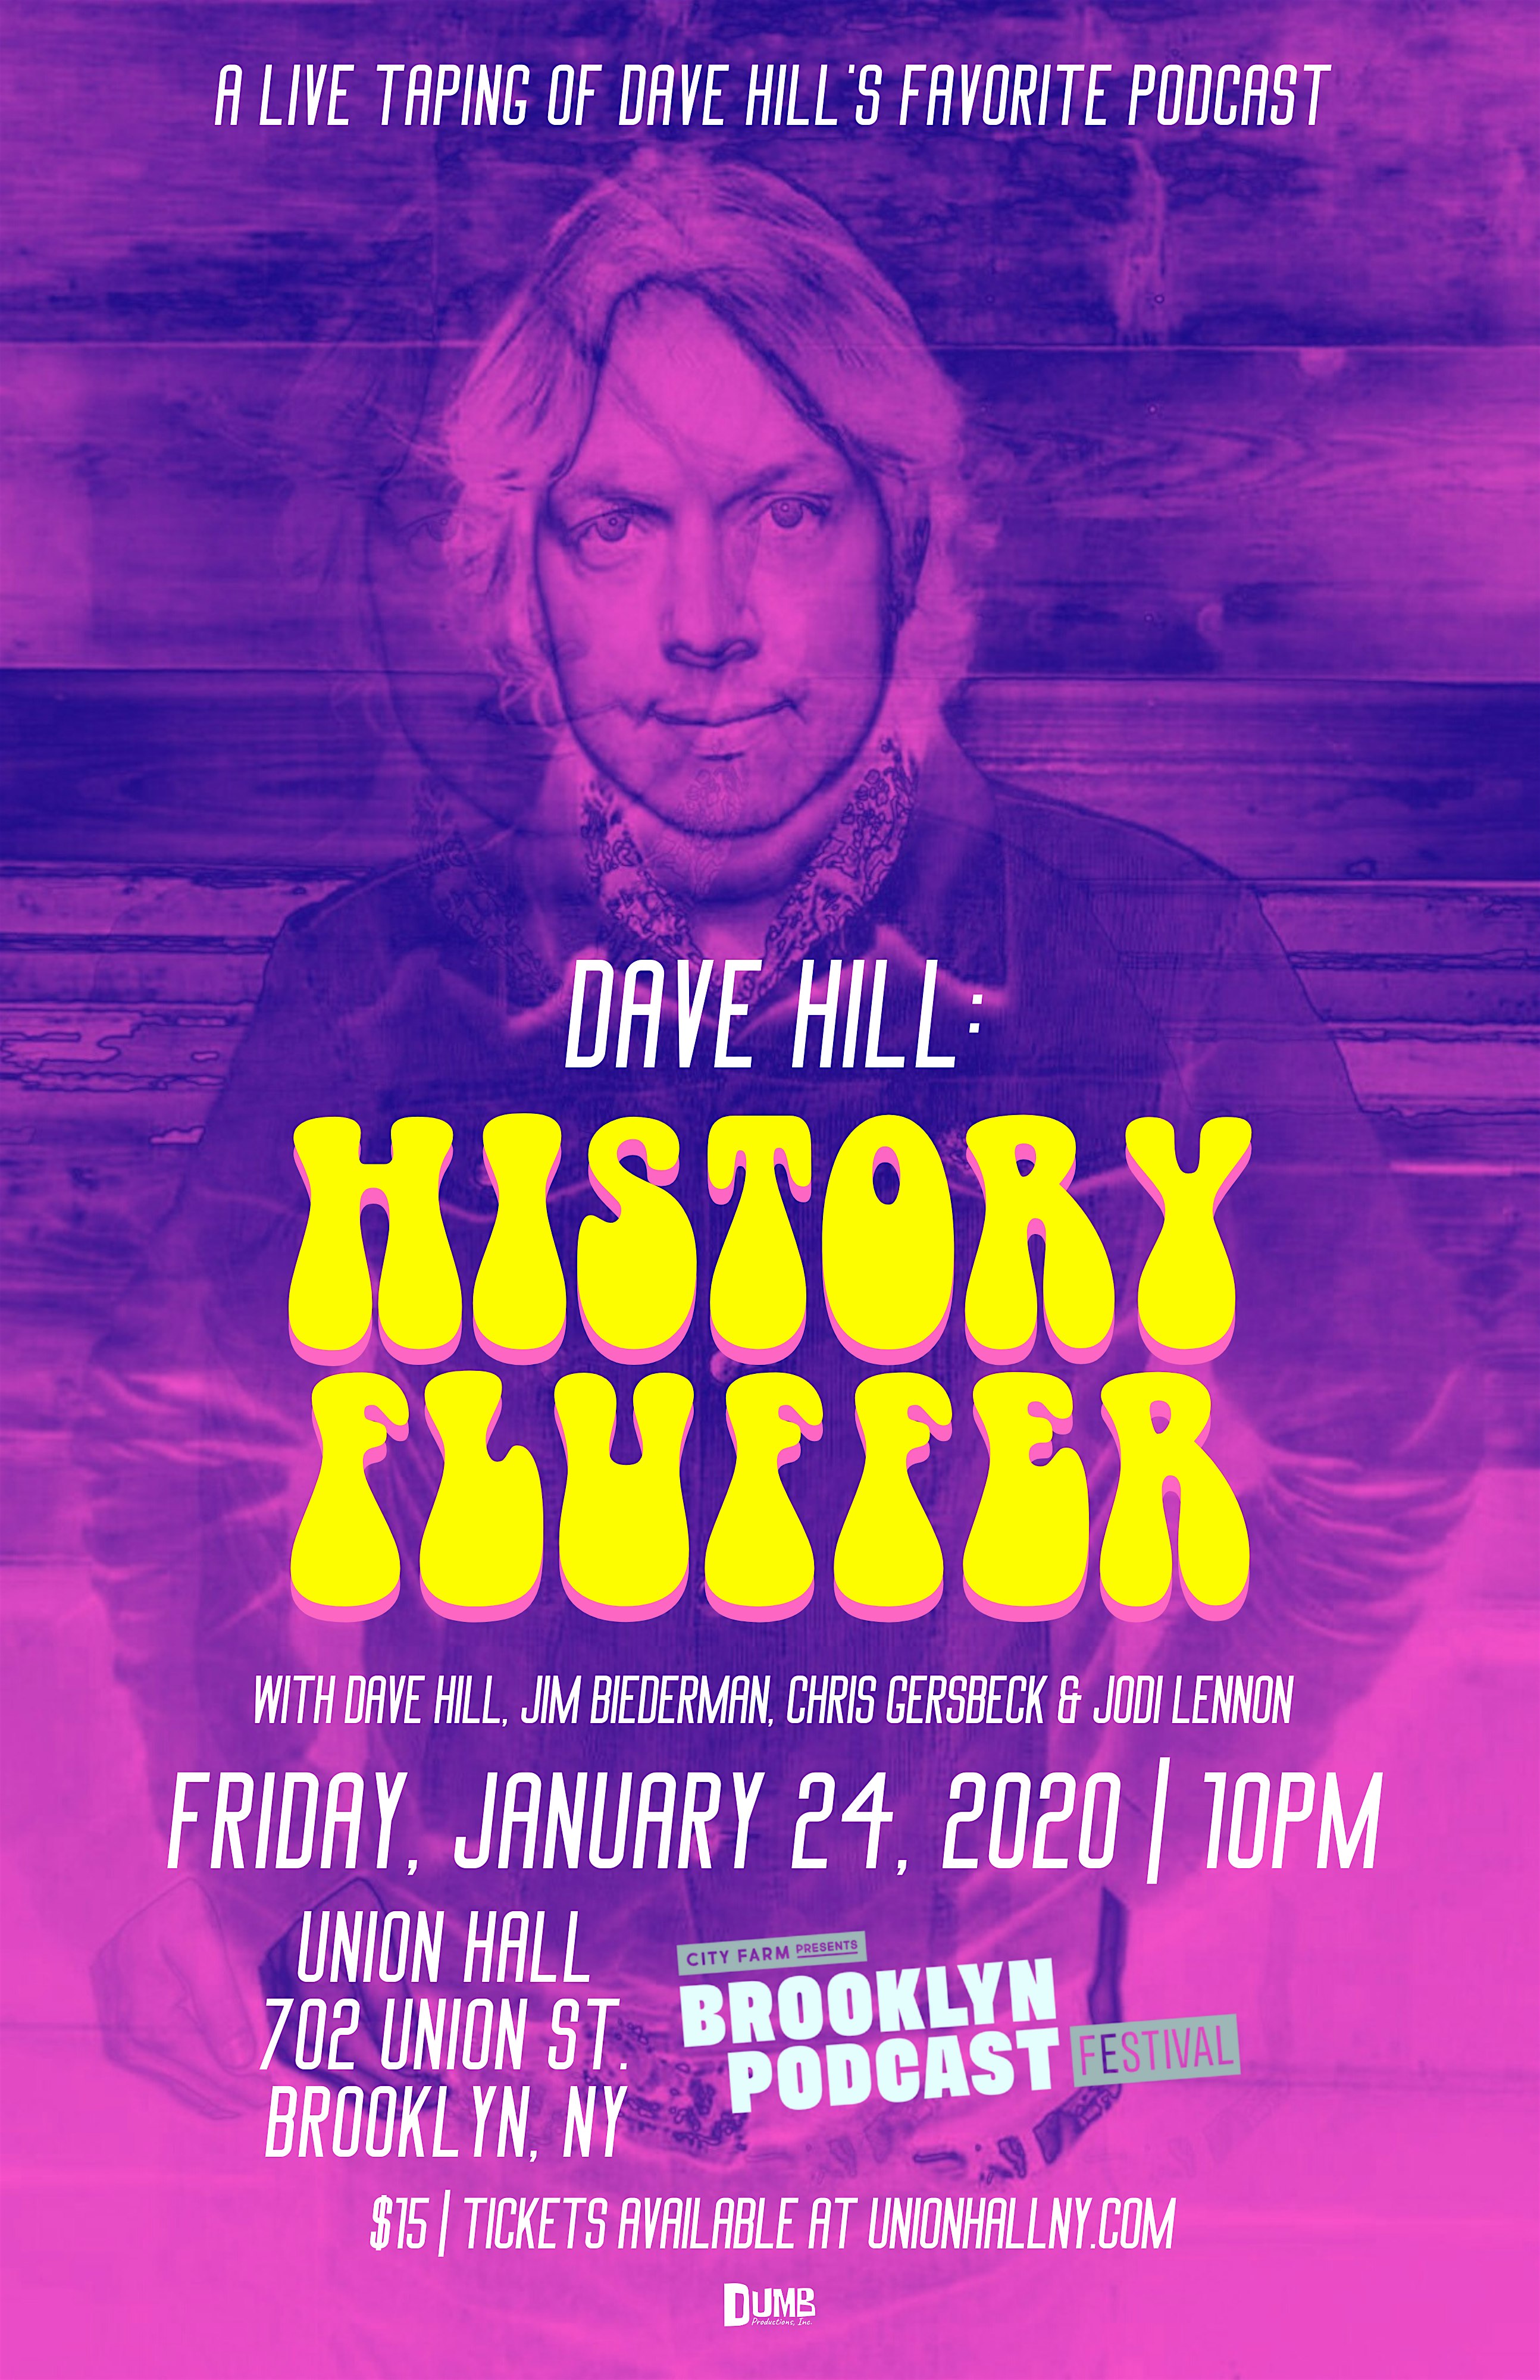 Dave Hill: History Fluffer - Live Podcast Taping